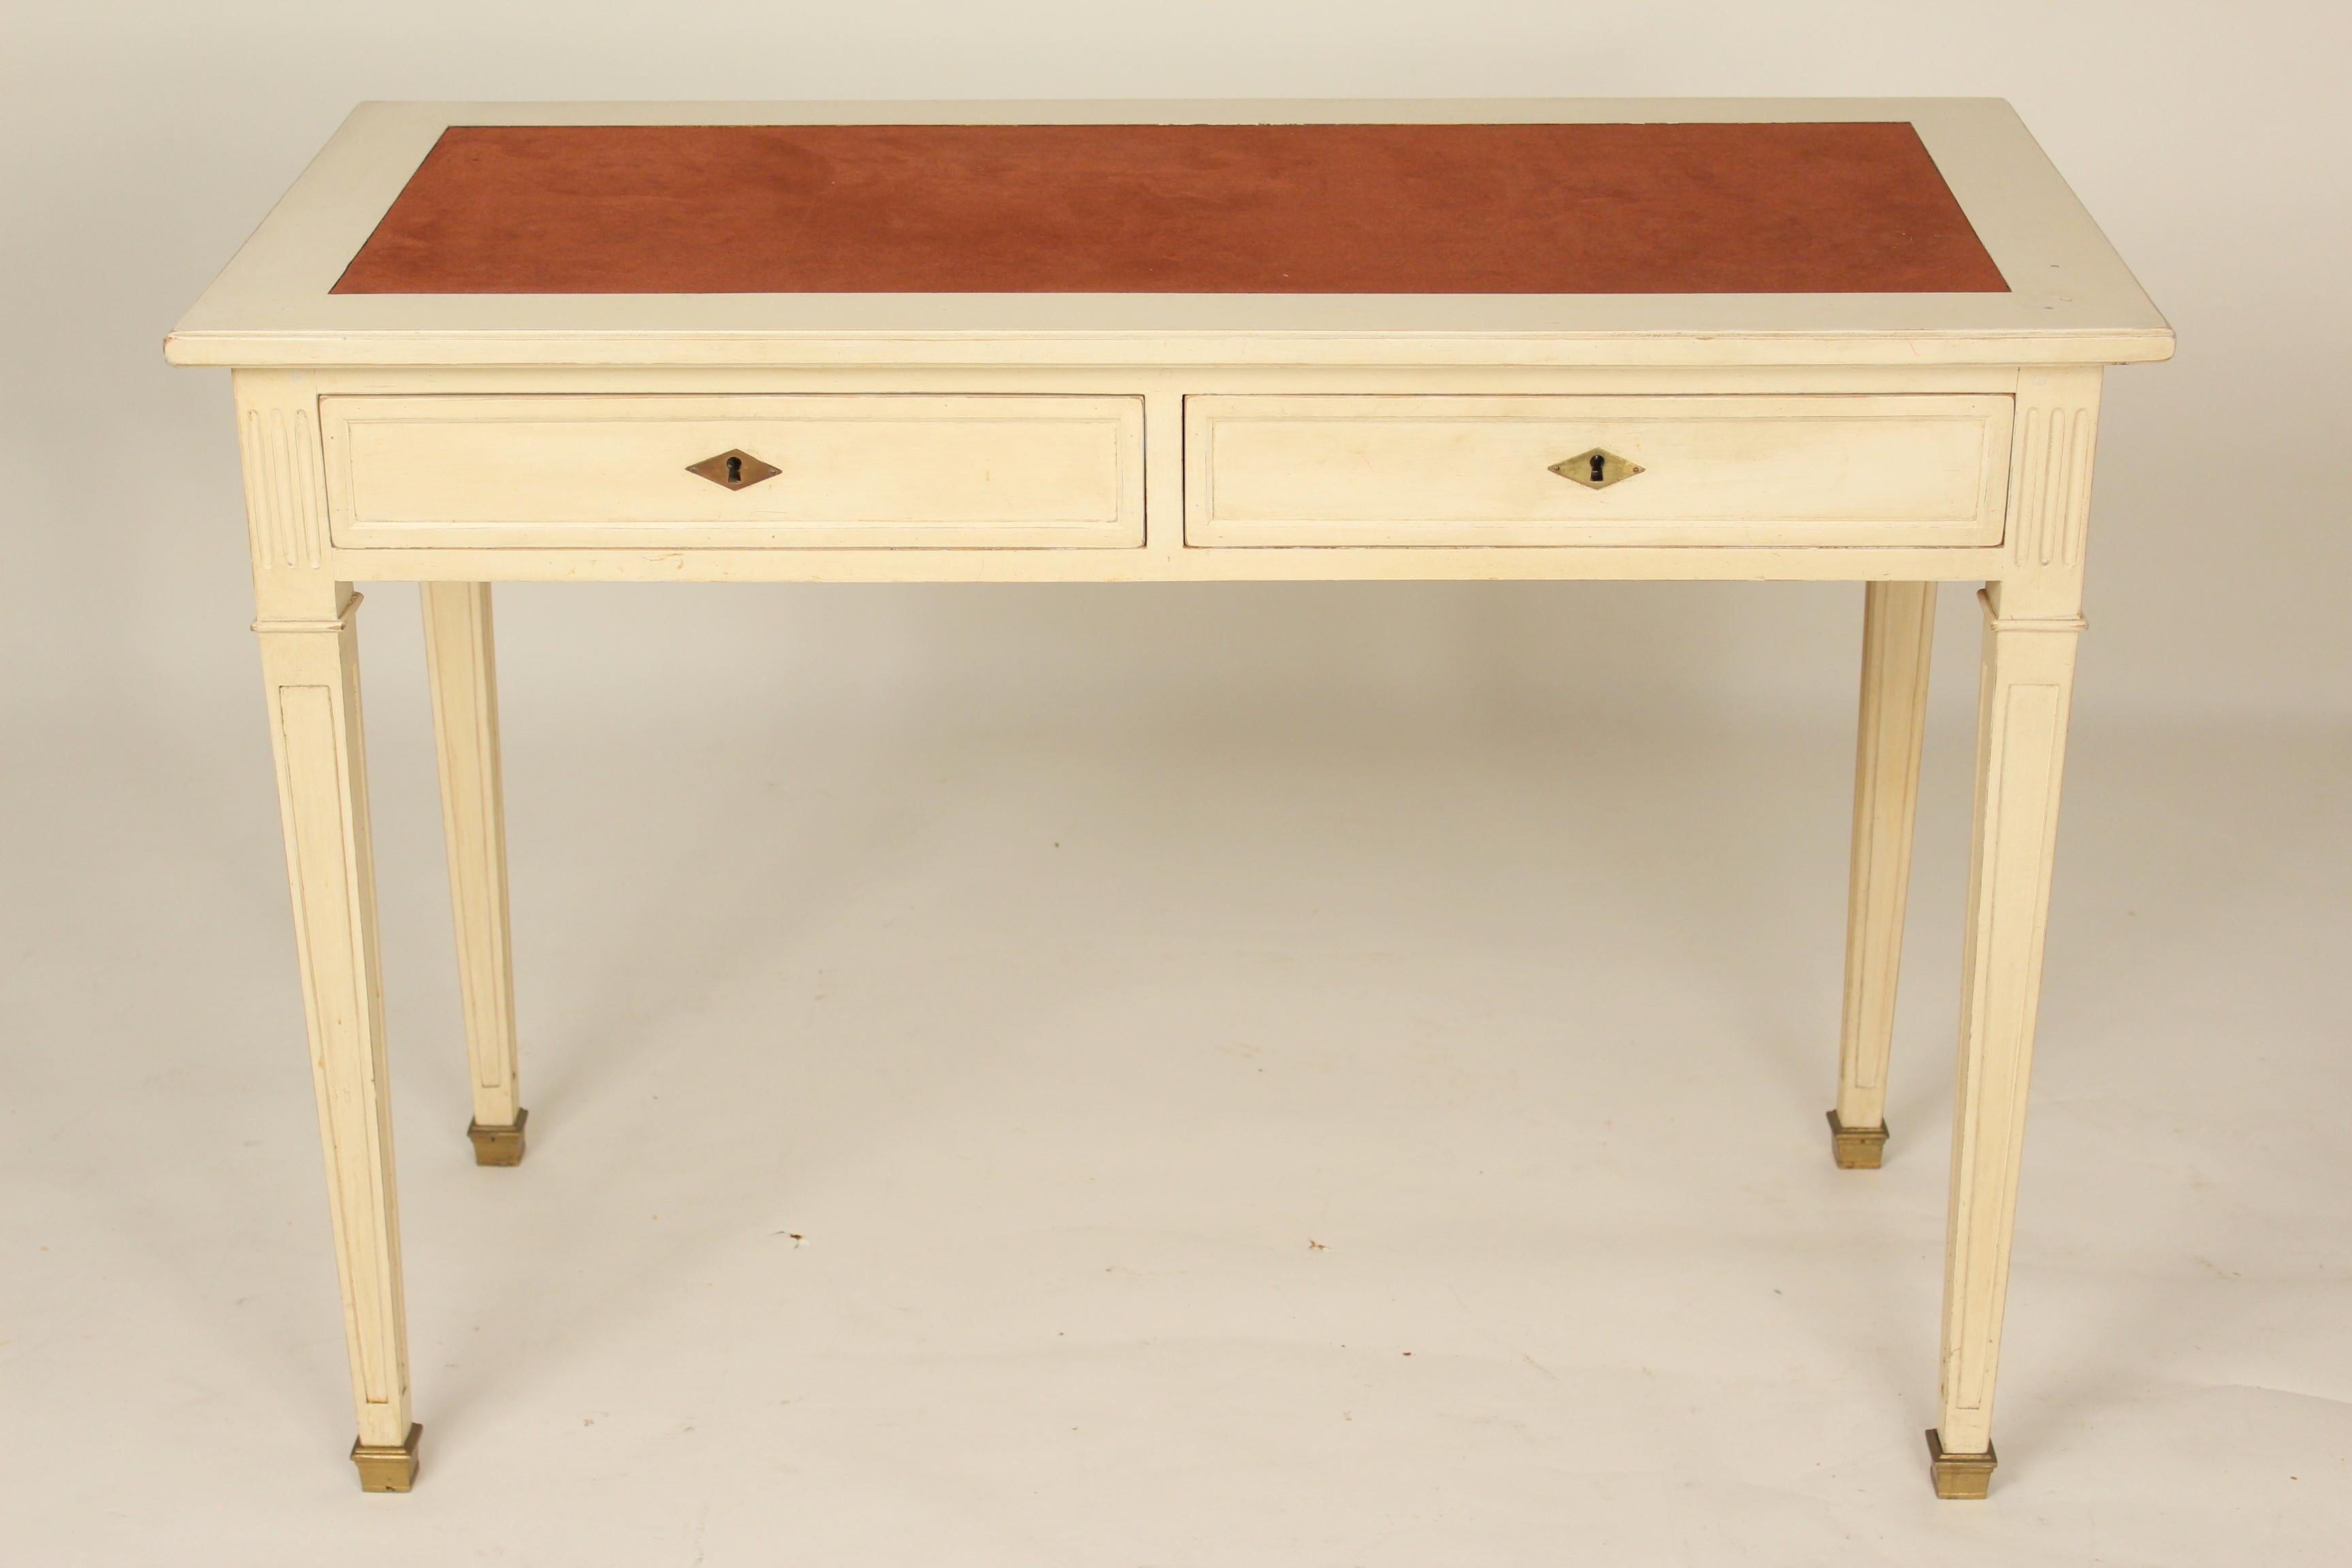 Directoire style painted writing table with suede top, brass escutcheons, bronze sabots and writing slides that pull on either end, circa mid-20th century. Handmade construction with mortise tenon and dowel outer construction and hand dovetailed